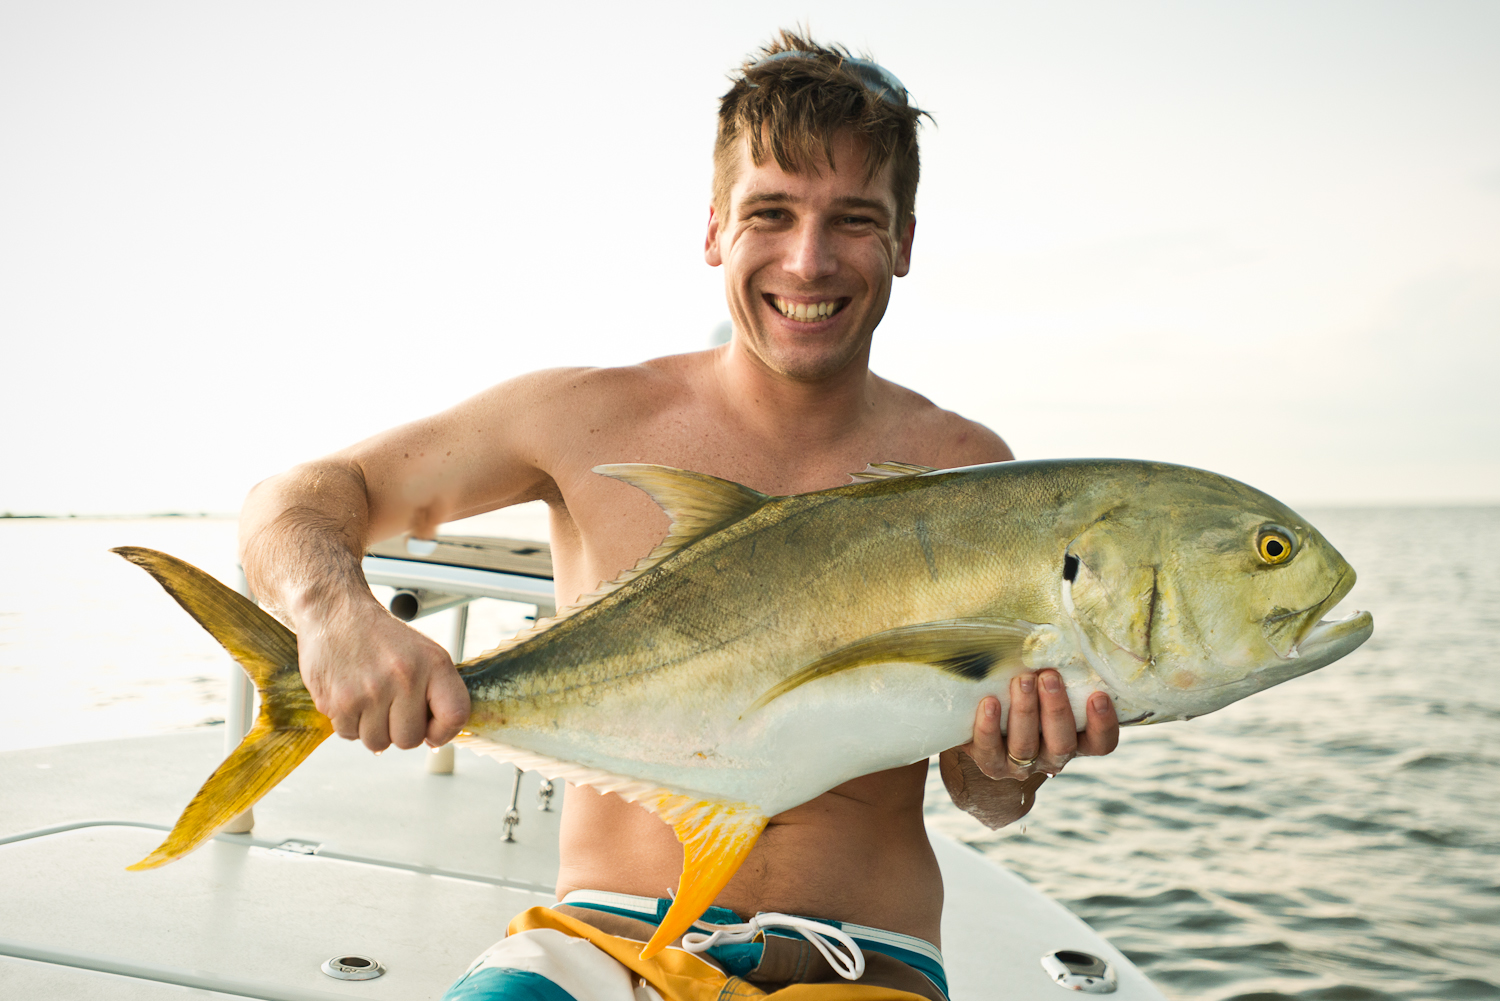 Southern-Fly-Expeditions-StephenNicoll-JackCrevalle-05Sep2015-1.jpg